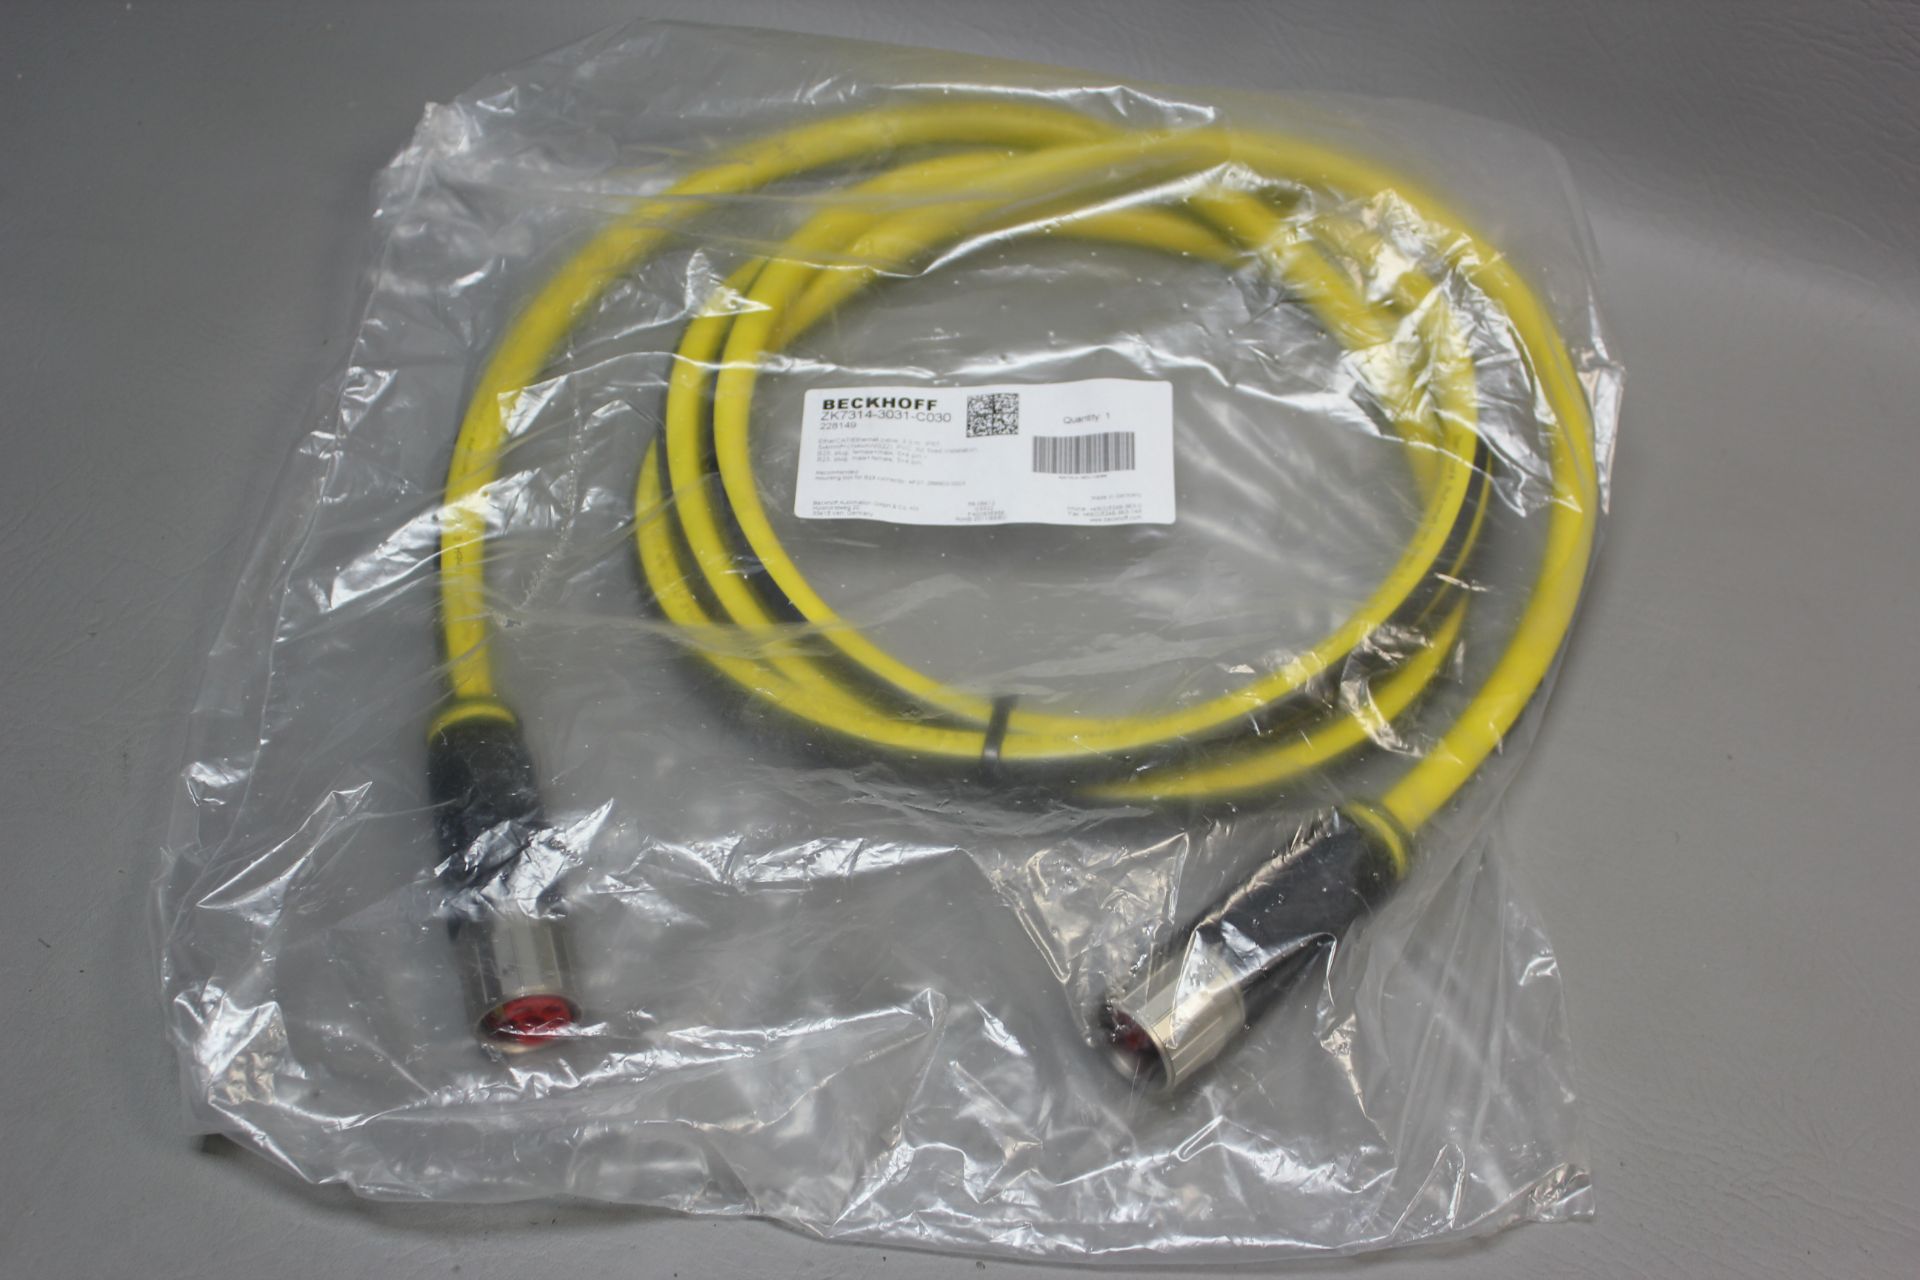 NEW BECKHOFF ETHERCAT/ETHERNET CABLE ASSEMBLY